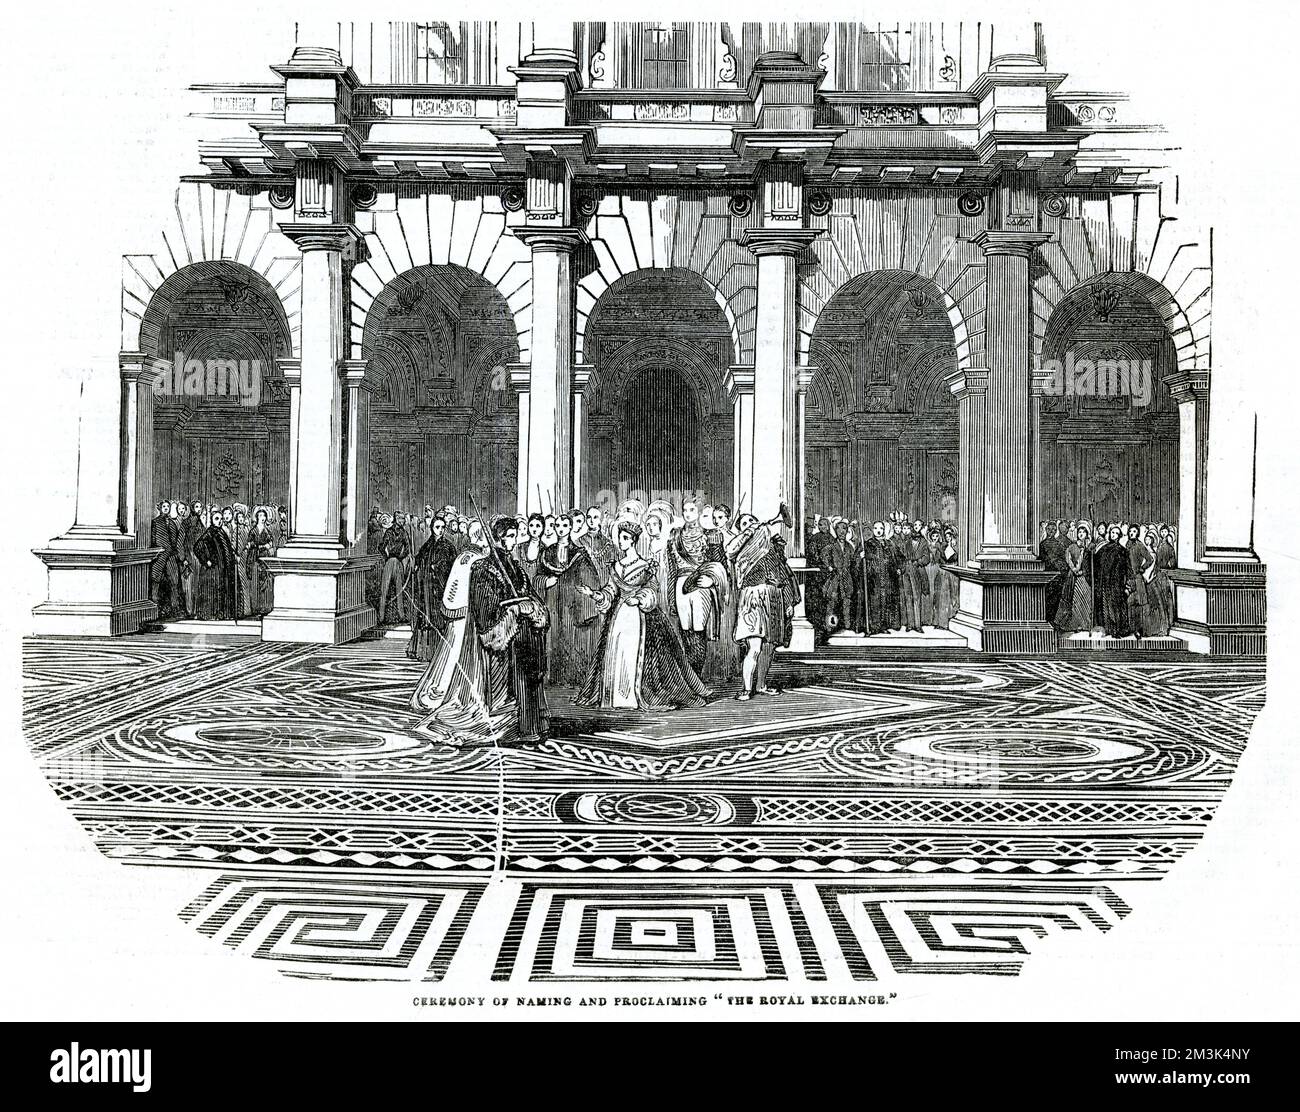 Queen Victoria undertaking the ceremony of naming and proclaiming 'The Royal Exchange' at its official opening in 1844.     Date: 1844 Stock Photo